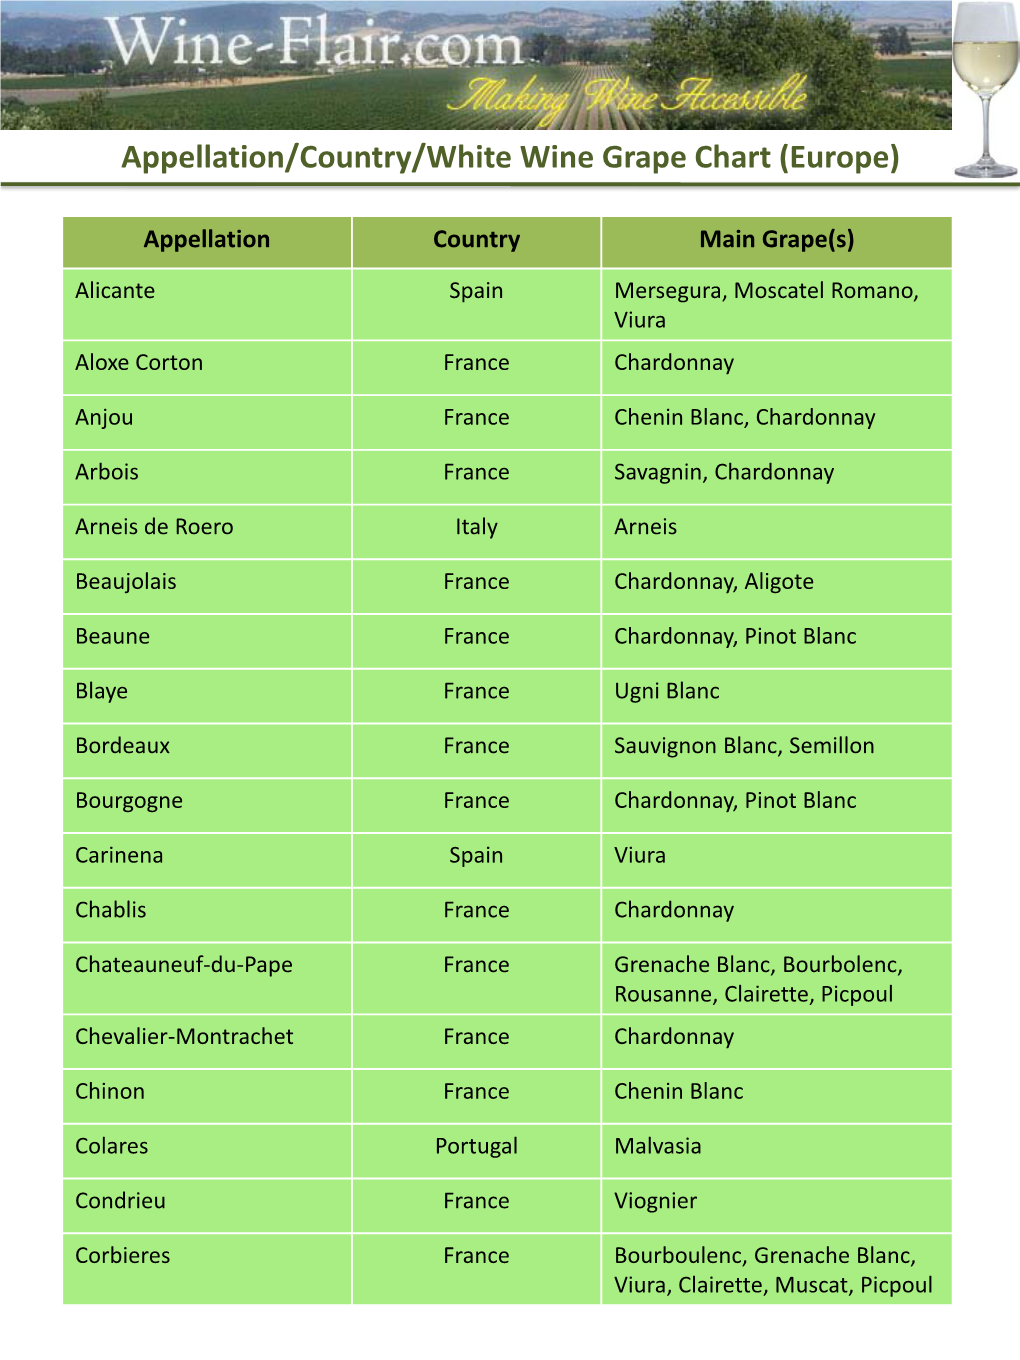 Appellation/Country/White Wine Grape Chart (Europe)